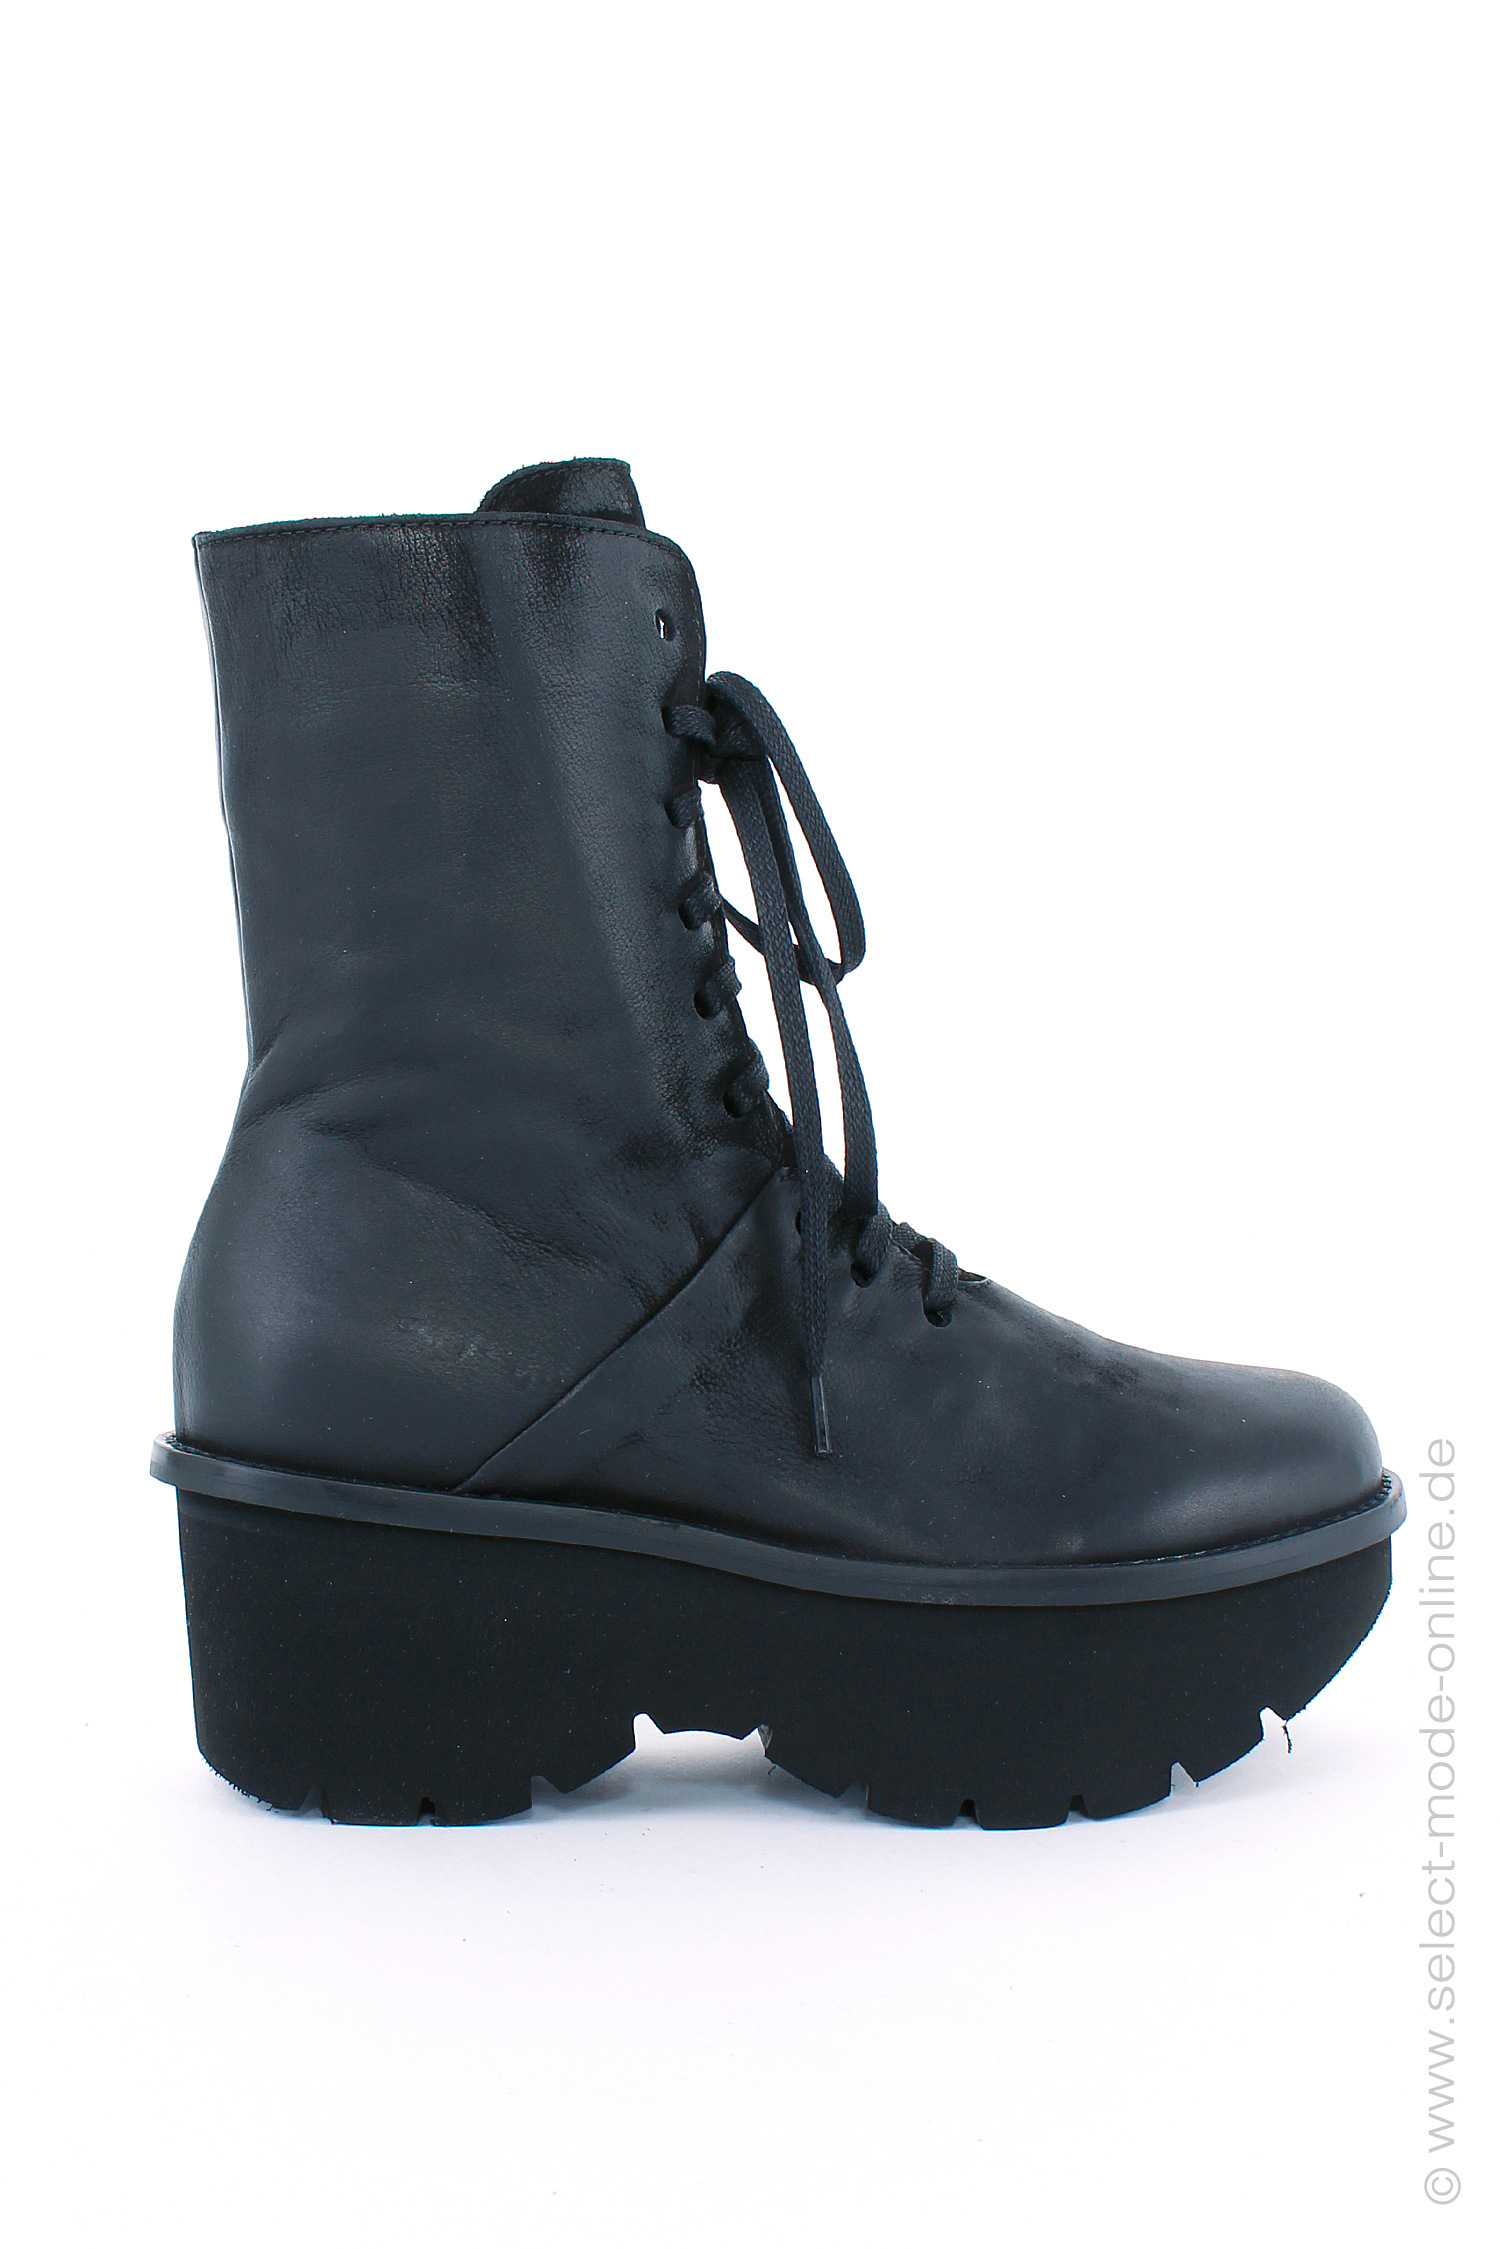 Boots with zipper - black - 1145